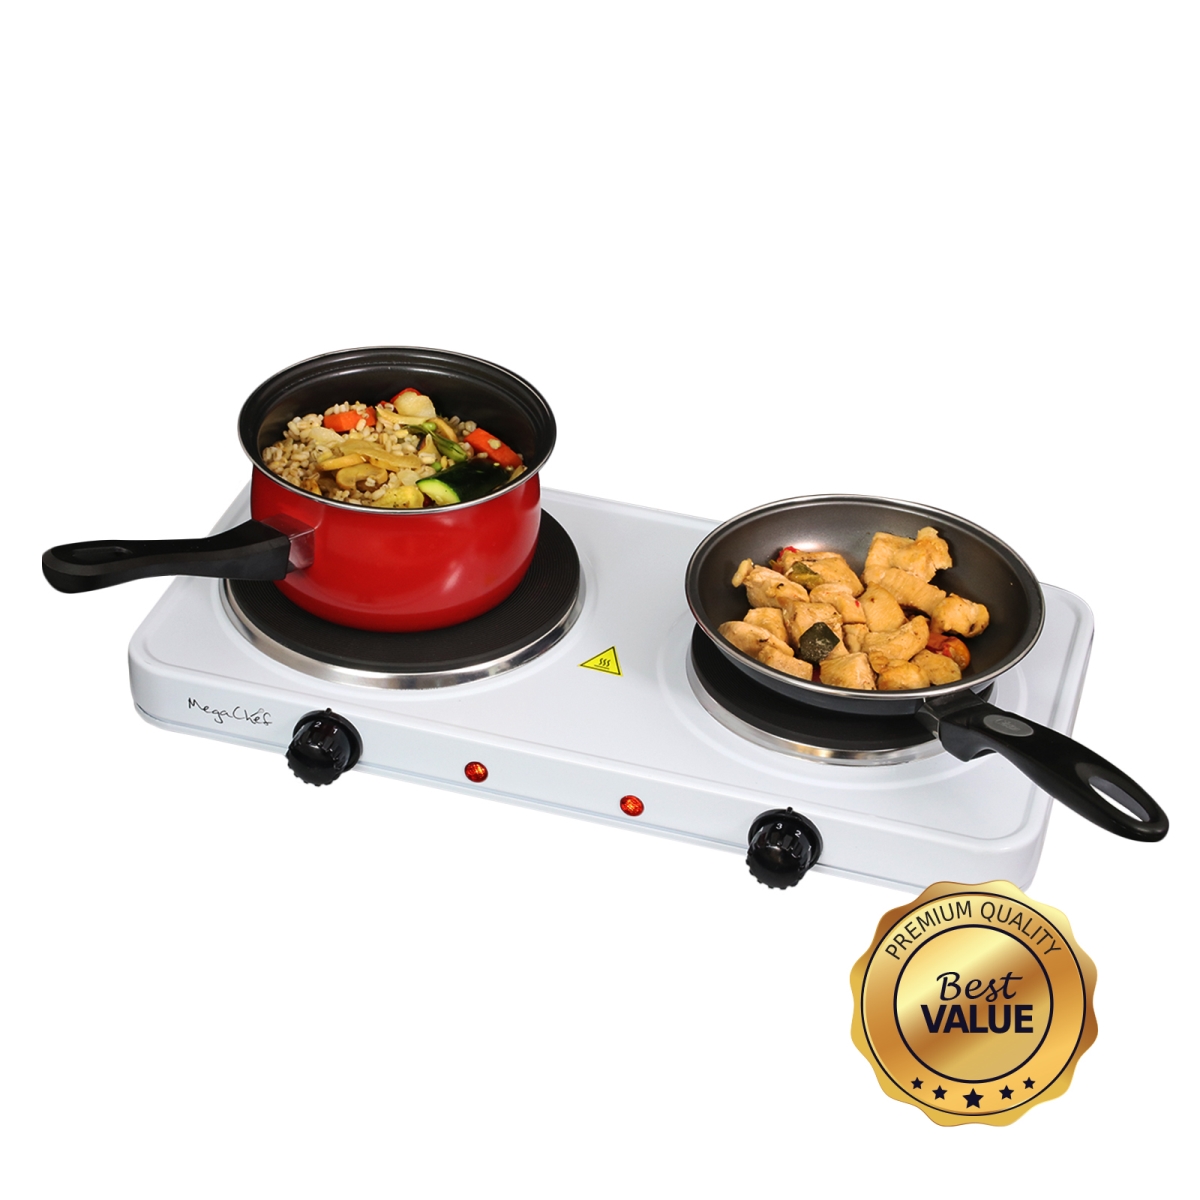 Picture of Megachef MC-2012B Electric Easily Portable Ultra Lightweight Dual Burner Cooktop Buffet Range in Sleek - White